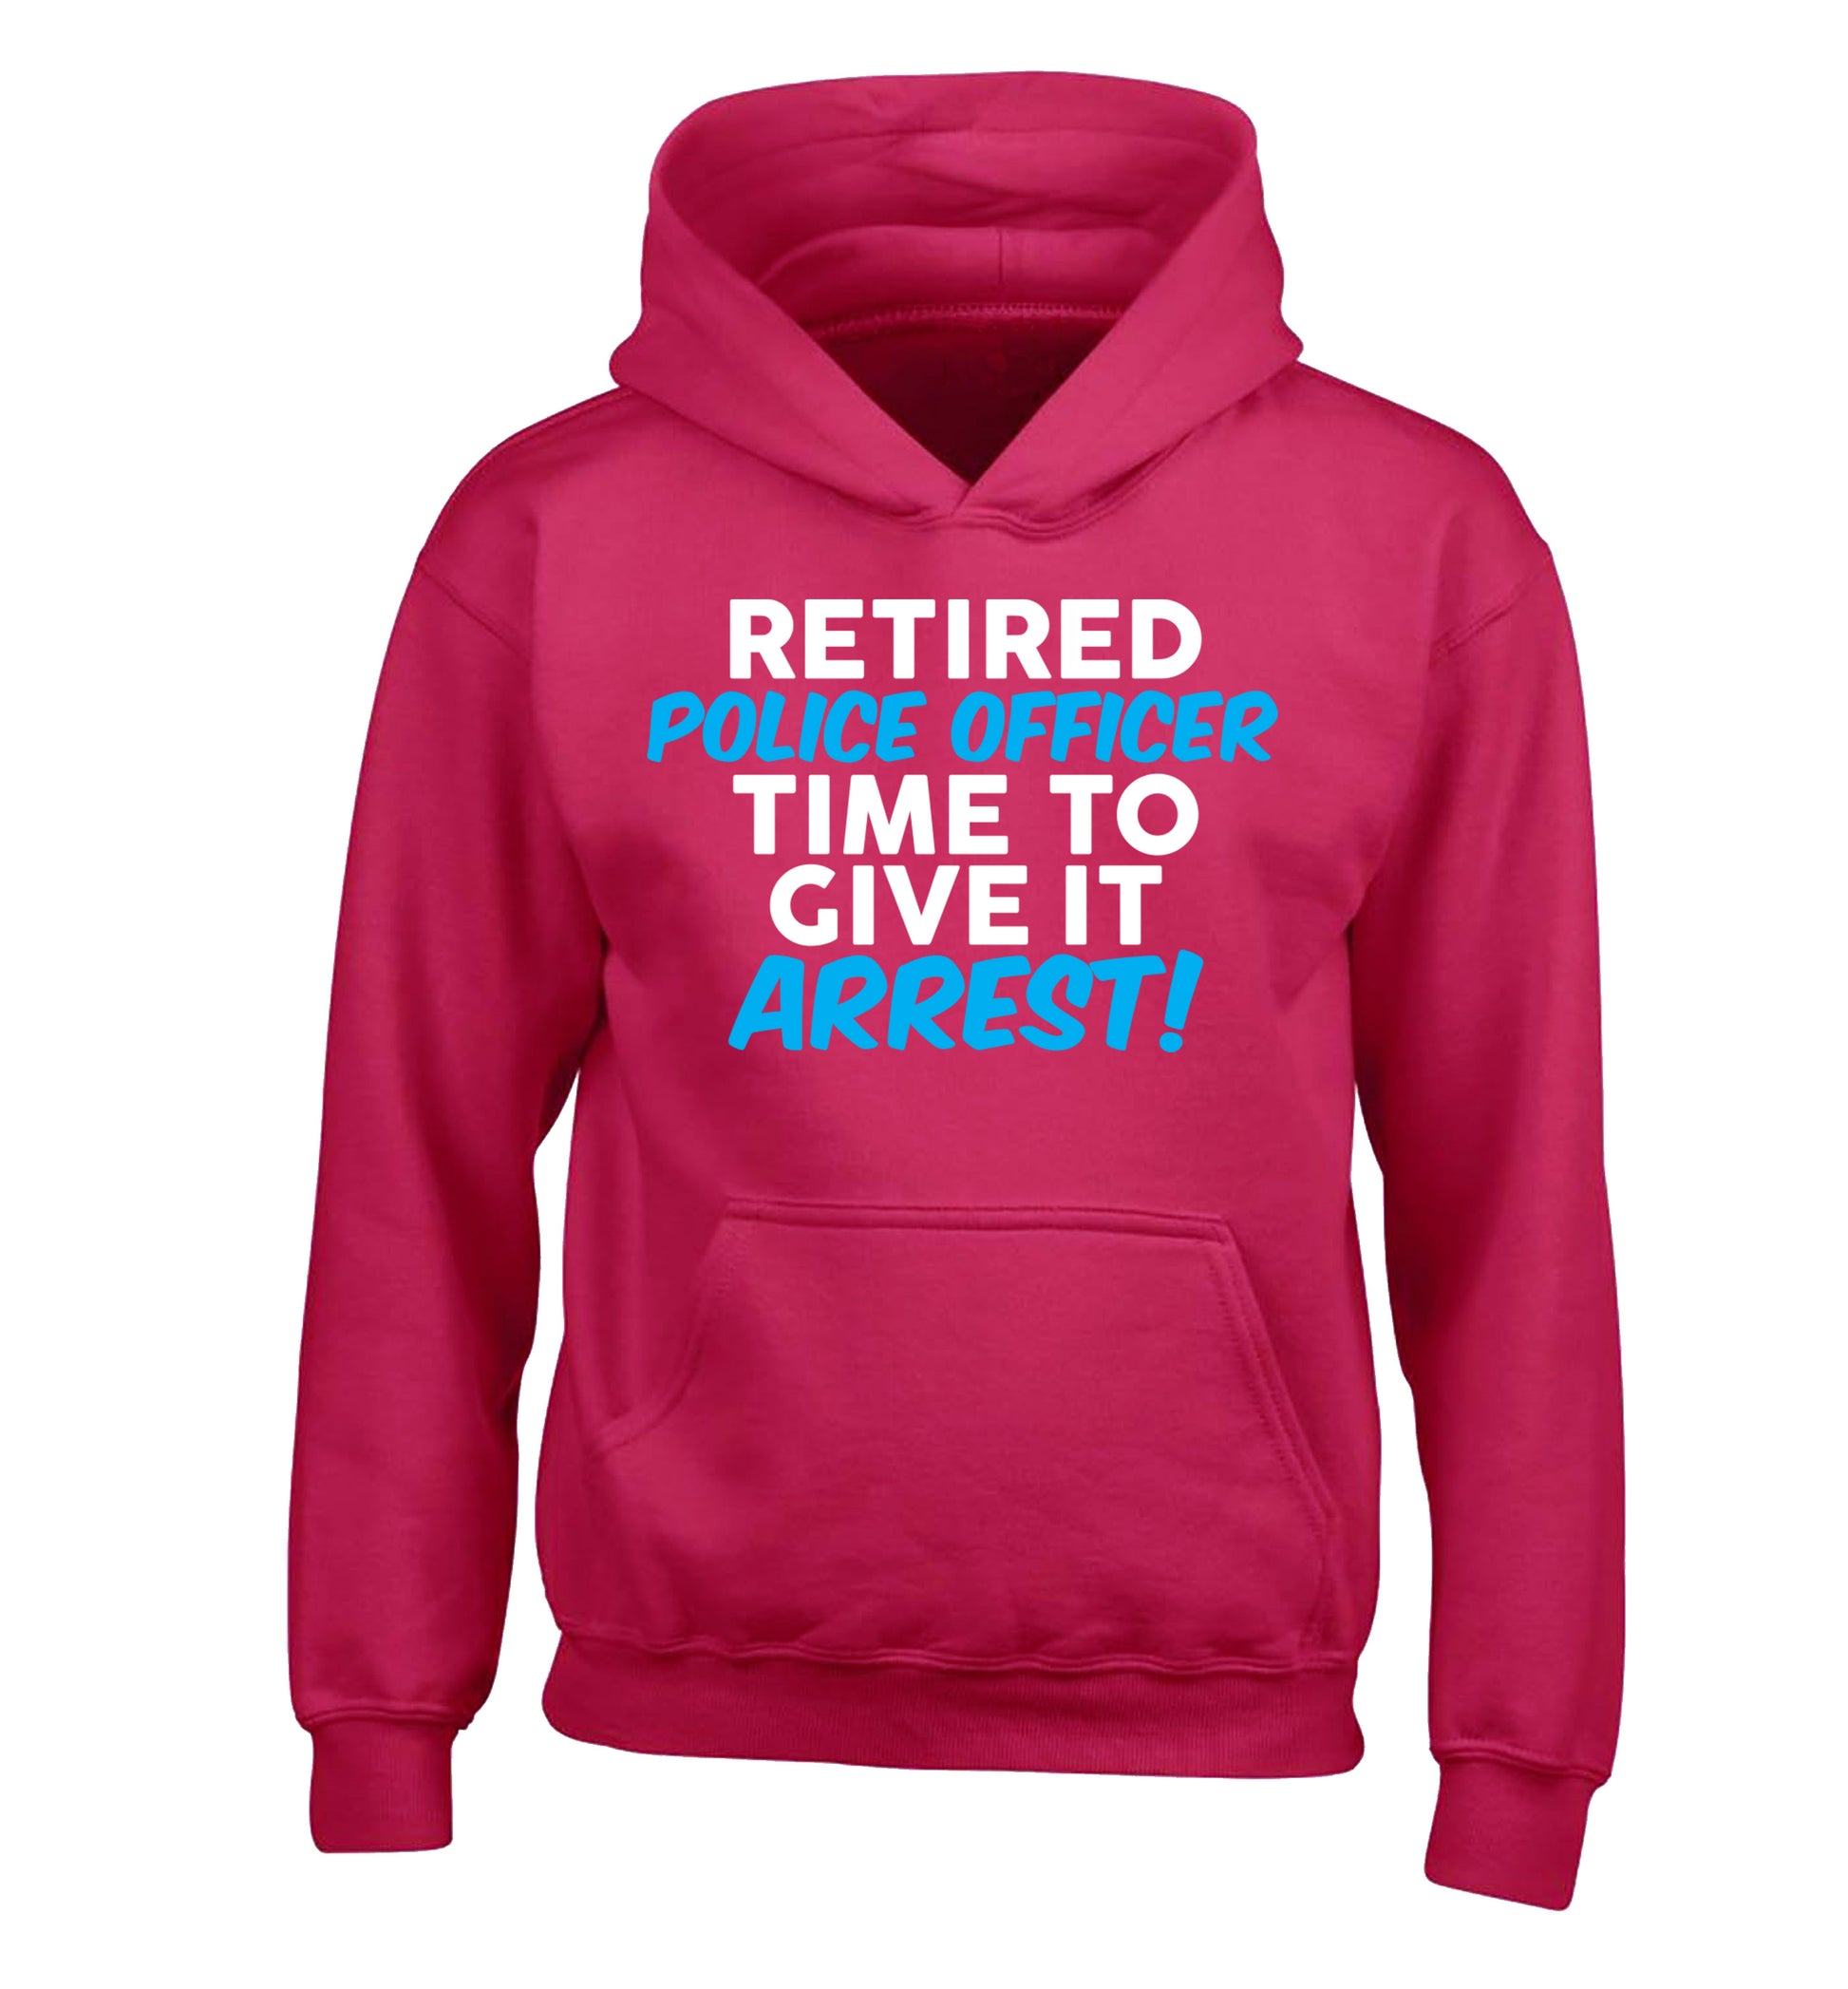 Retired police officer time to give it arrest children's pink hoodie 12-13 Years